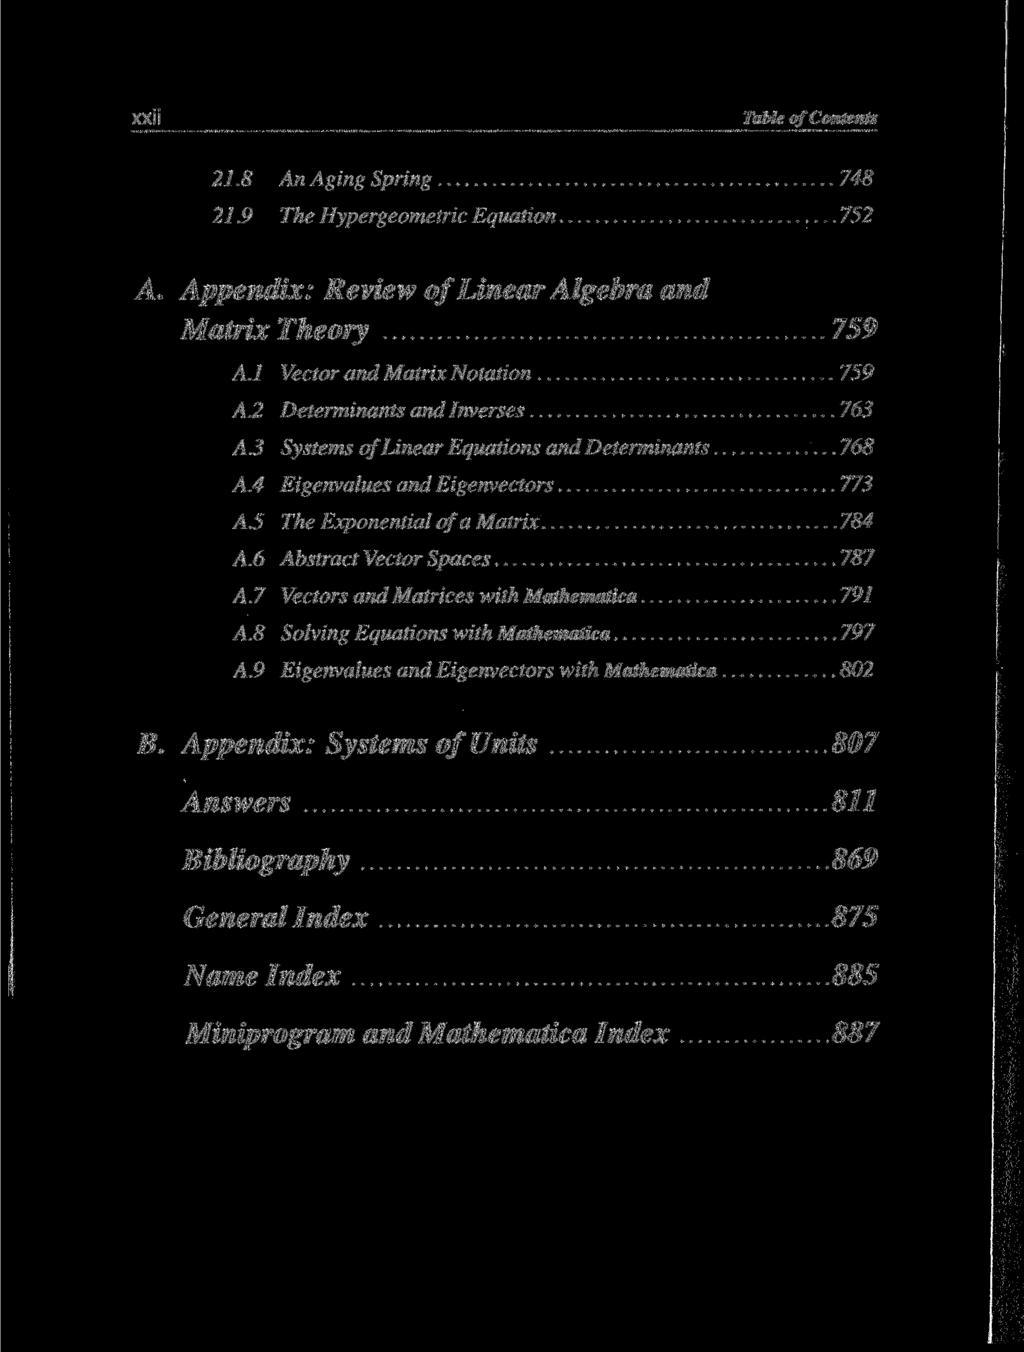 Table of Contents 21.8 An Aging Spring 748 21.9 The Hypergeometric Equation 752 A. Appendix: Review of Linear Algebra and Matrix Theory 759 A.l Vector and Matrix Notation 759 A.